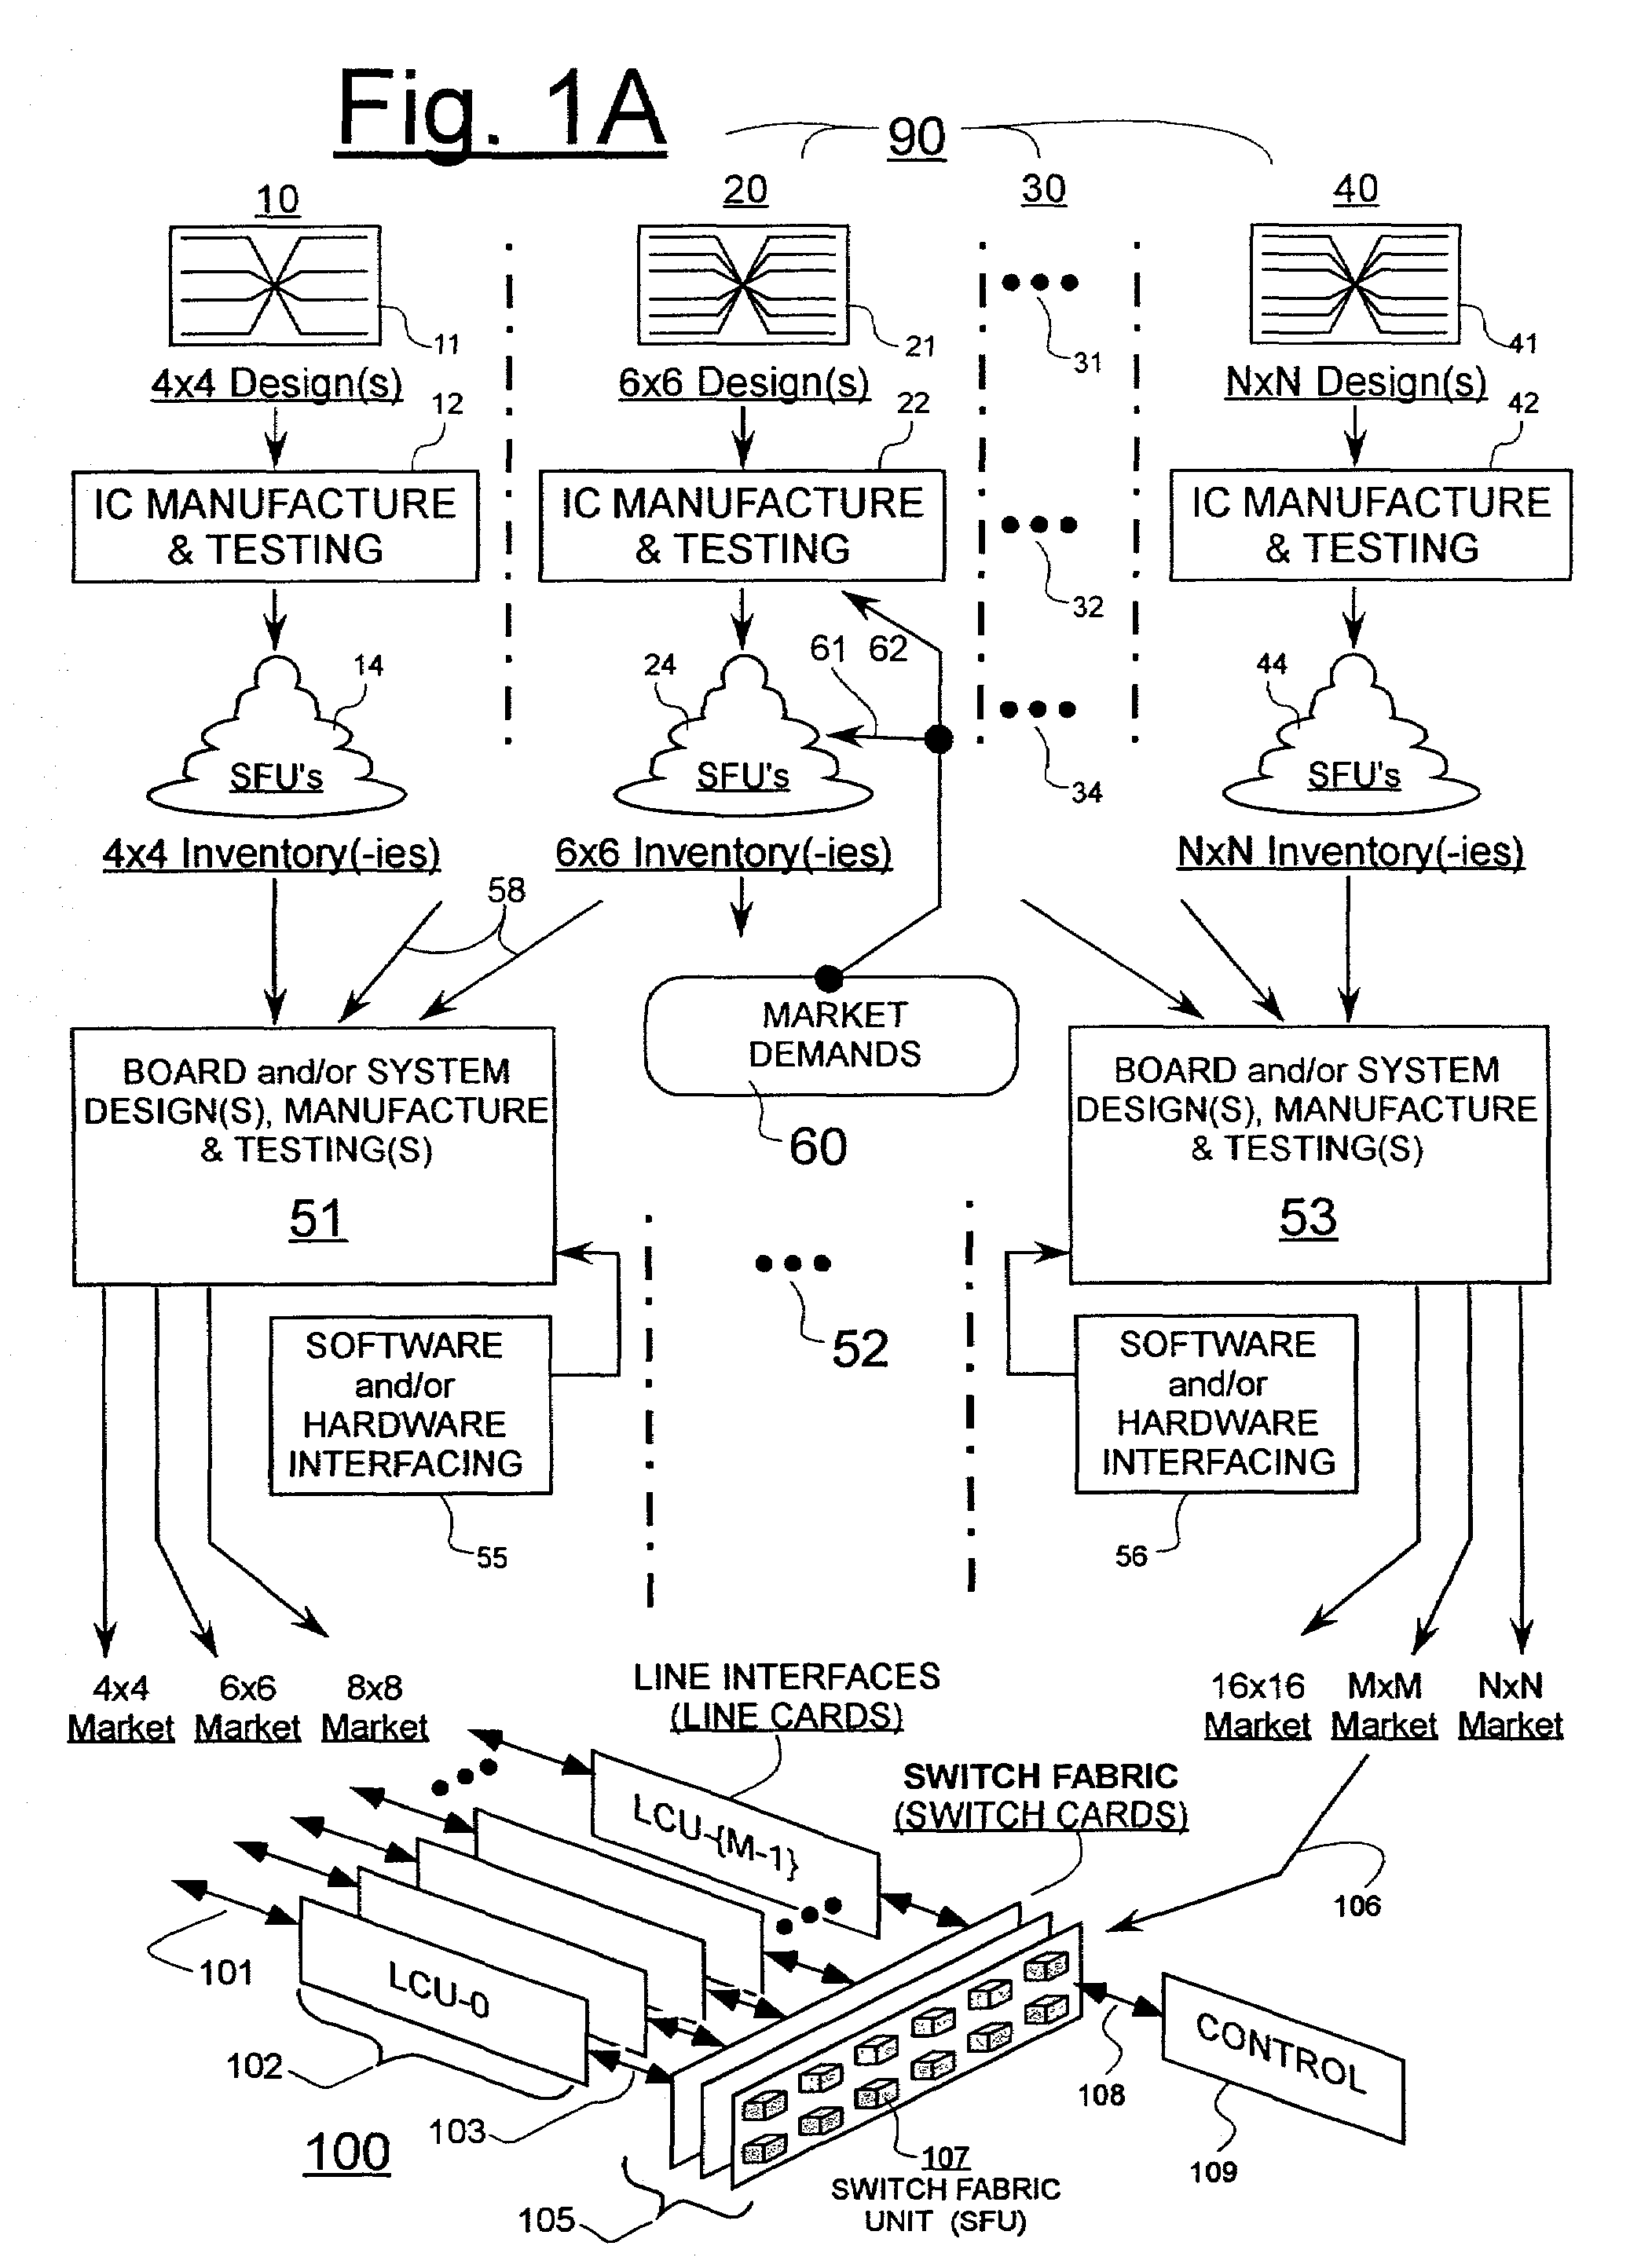 Programmably sliceable switch-fabric unit and methods of use